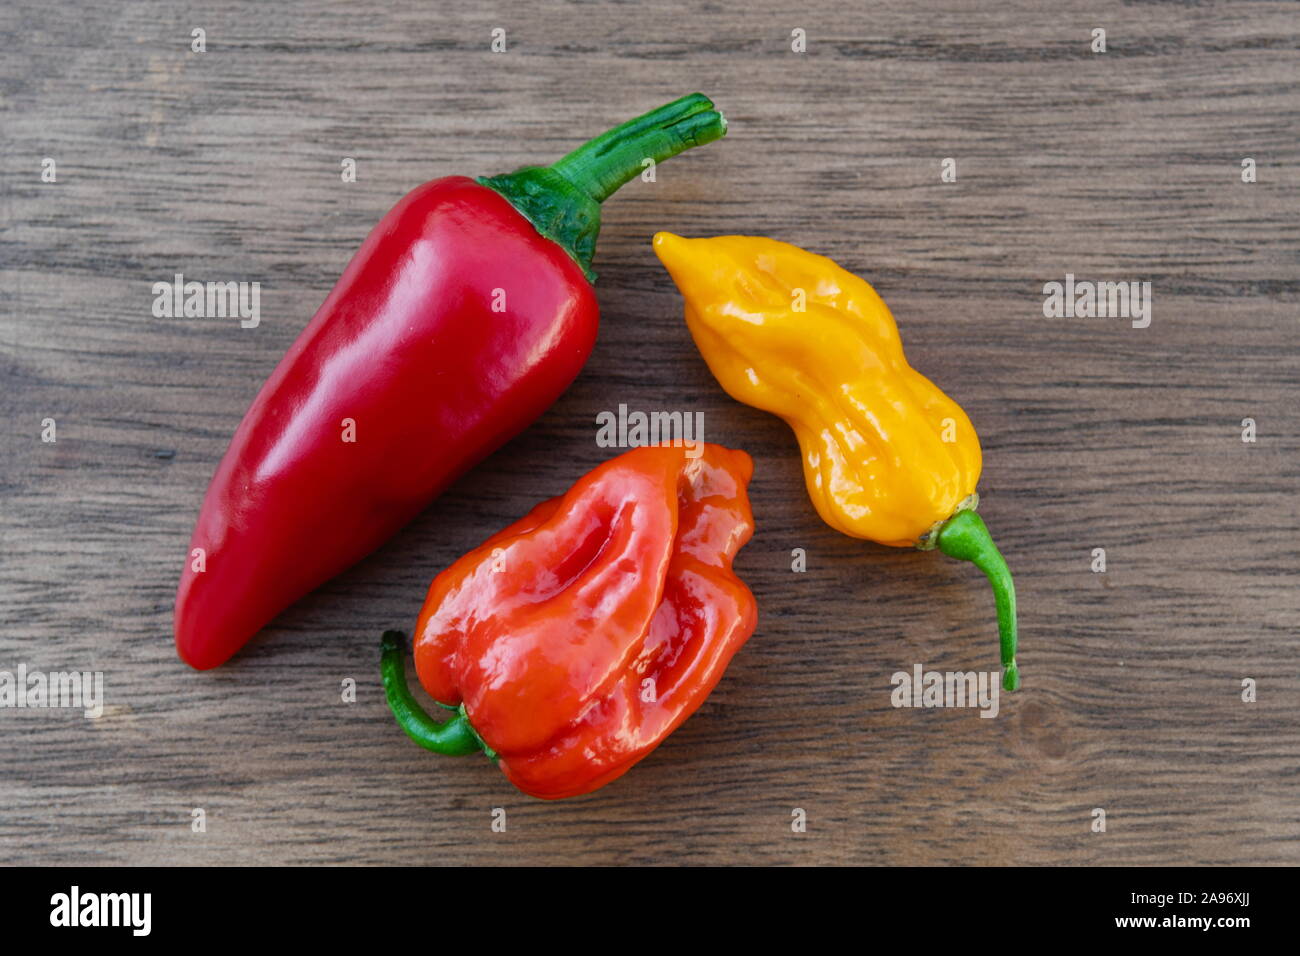 Three fresh organic chili peppers, red, orange and yellow hot peppers on a wooden table viewed from above, habanero, fatali, cayenne Stock Photo